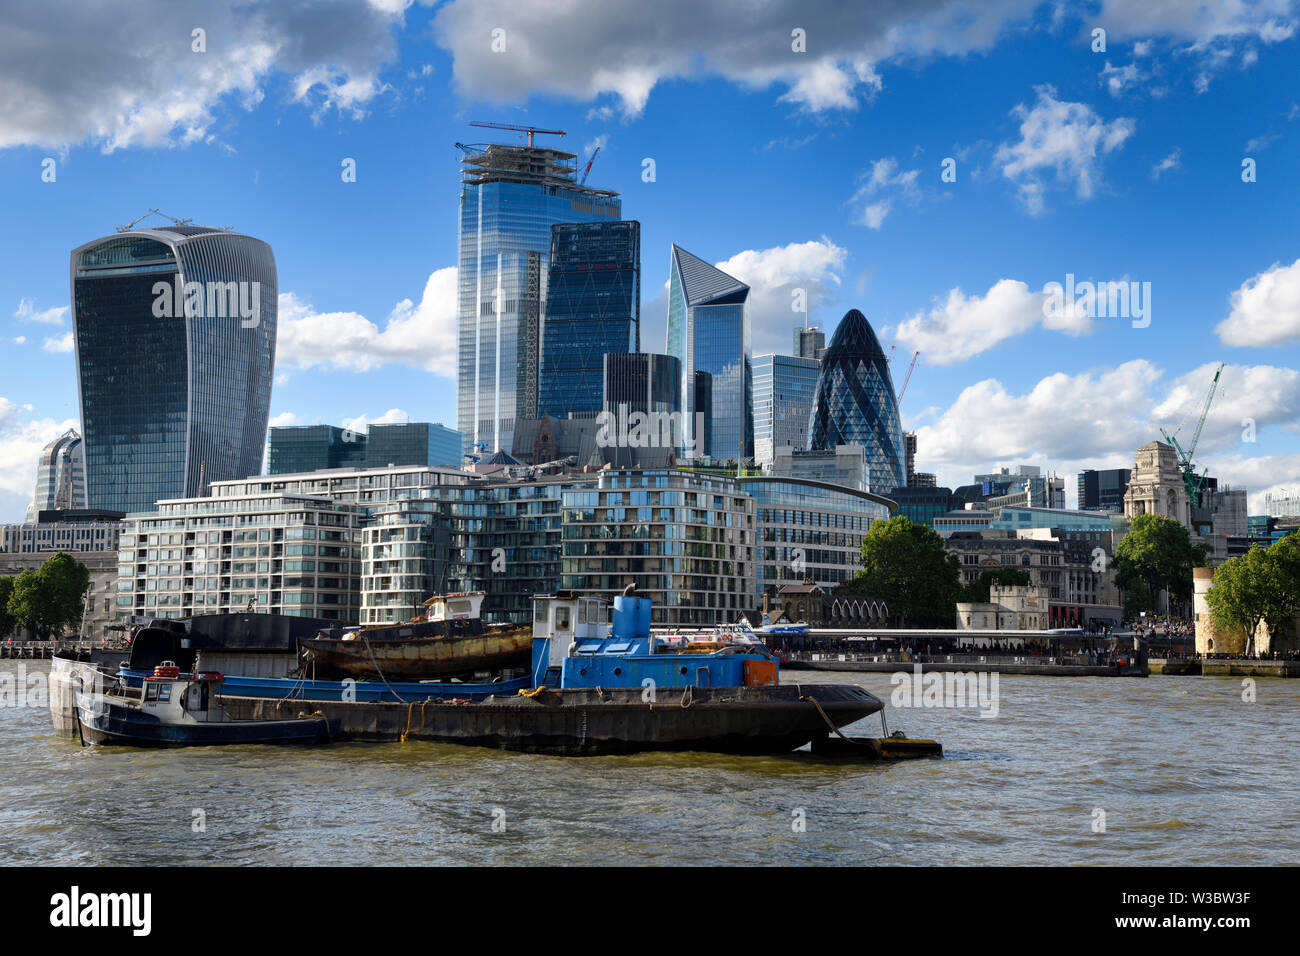 Towing barge Eileena tug boat on the River Thames with shiny glass highrise towers of the financial district in London England Stock Photo